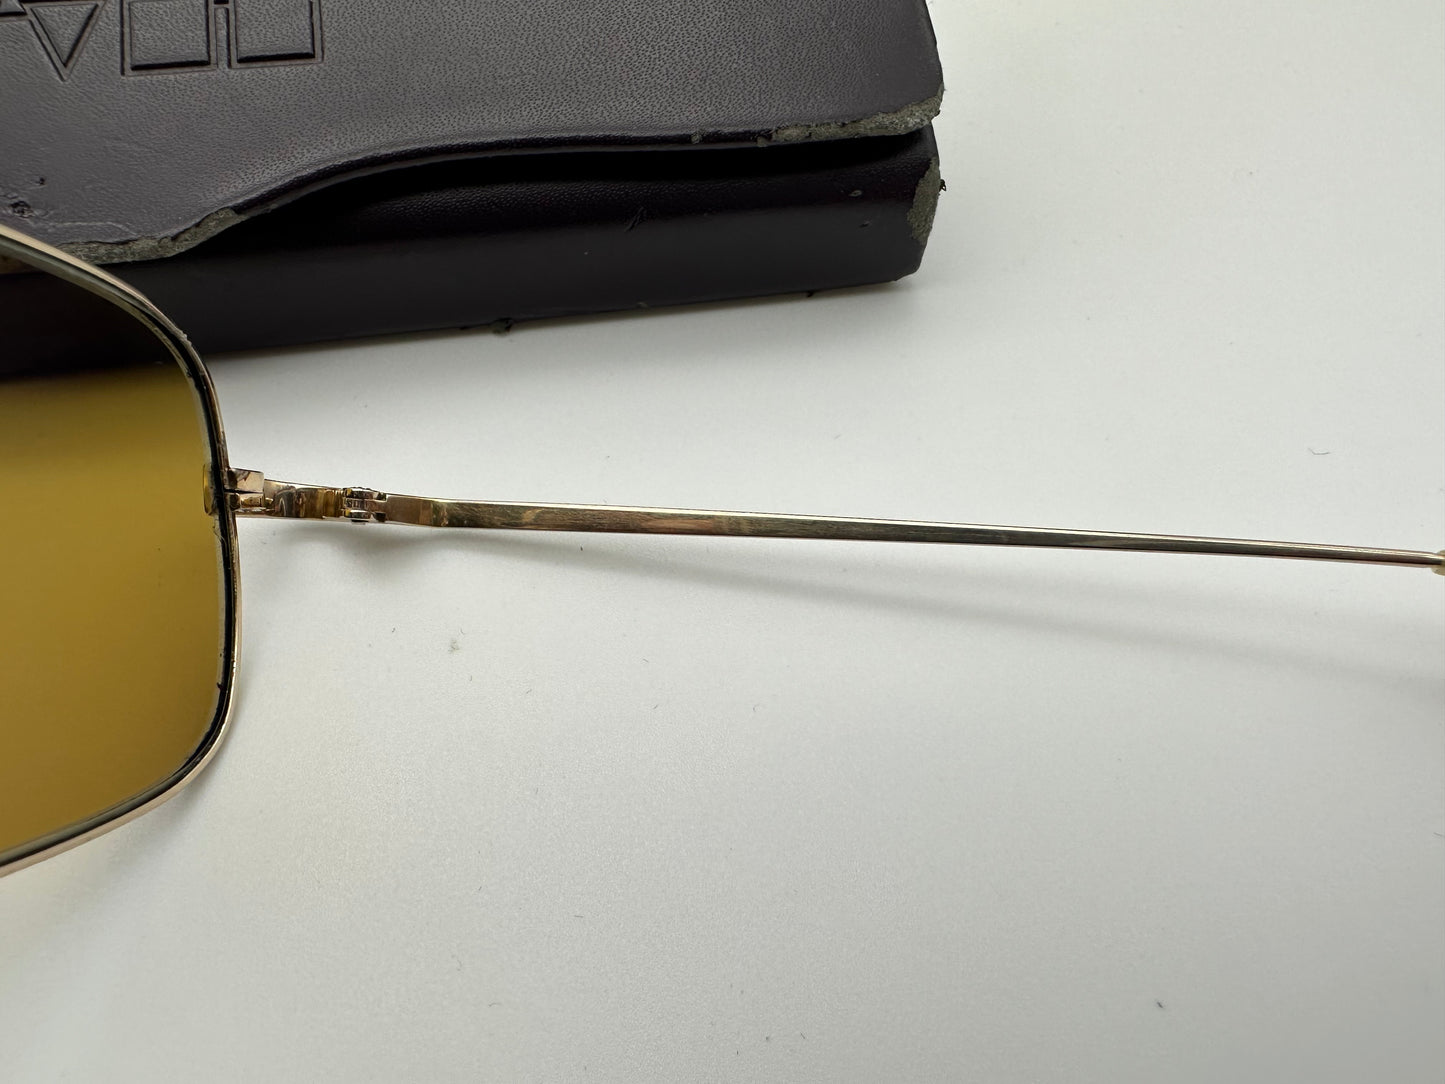 Oliver Peoples Victory 55 Gold VFX Cognac Burn Notice Michael Weston Rare None Polarized USED